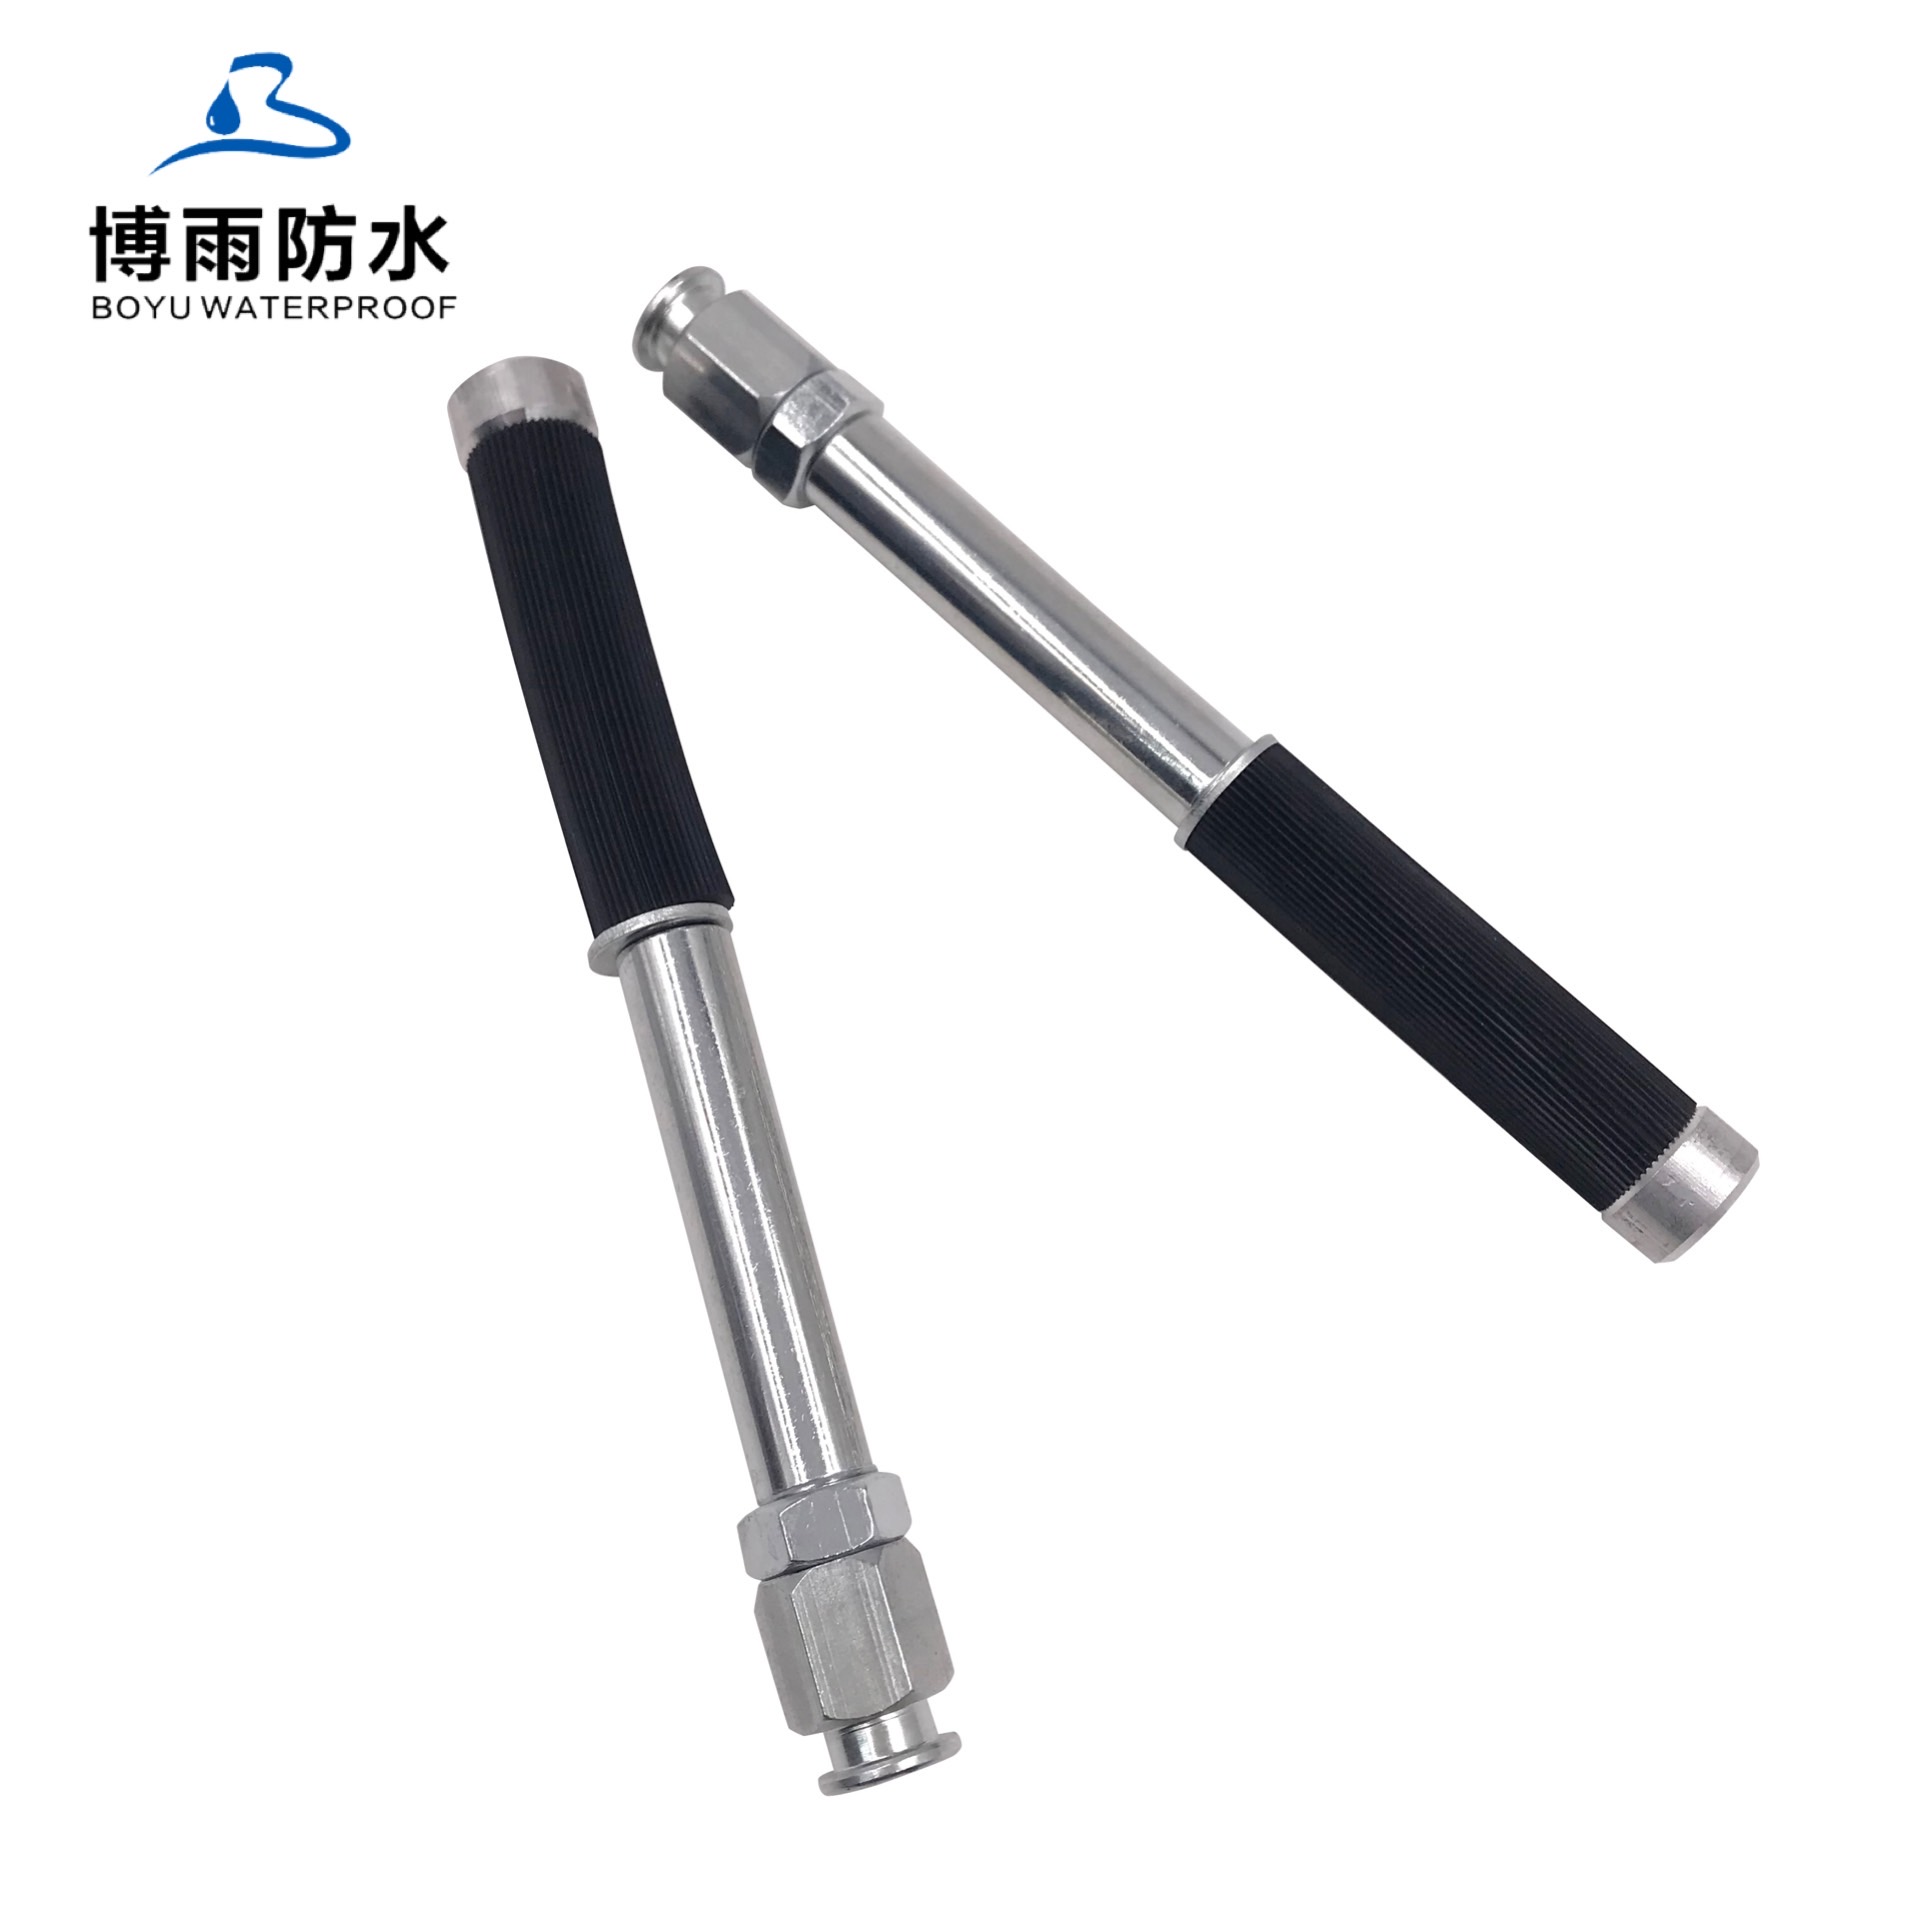 Hot New Products 13mm Injection Packer - Flat Head nipple M8 Injection Packers steel  18*170mm China factory waterproof customize – Boyu